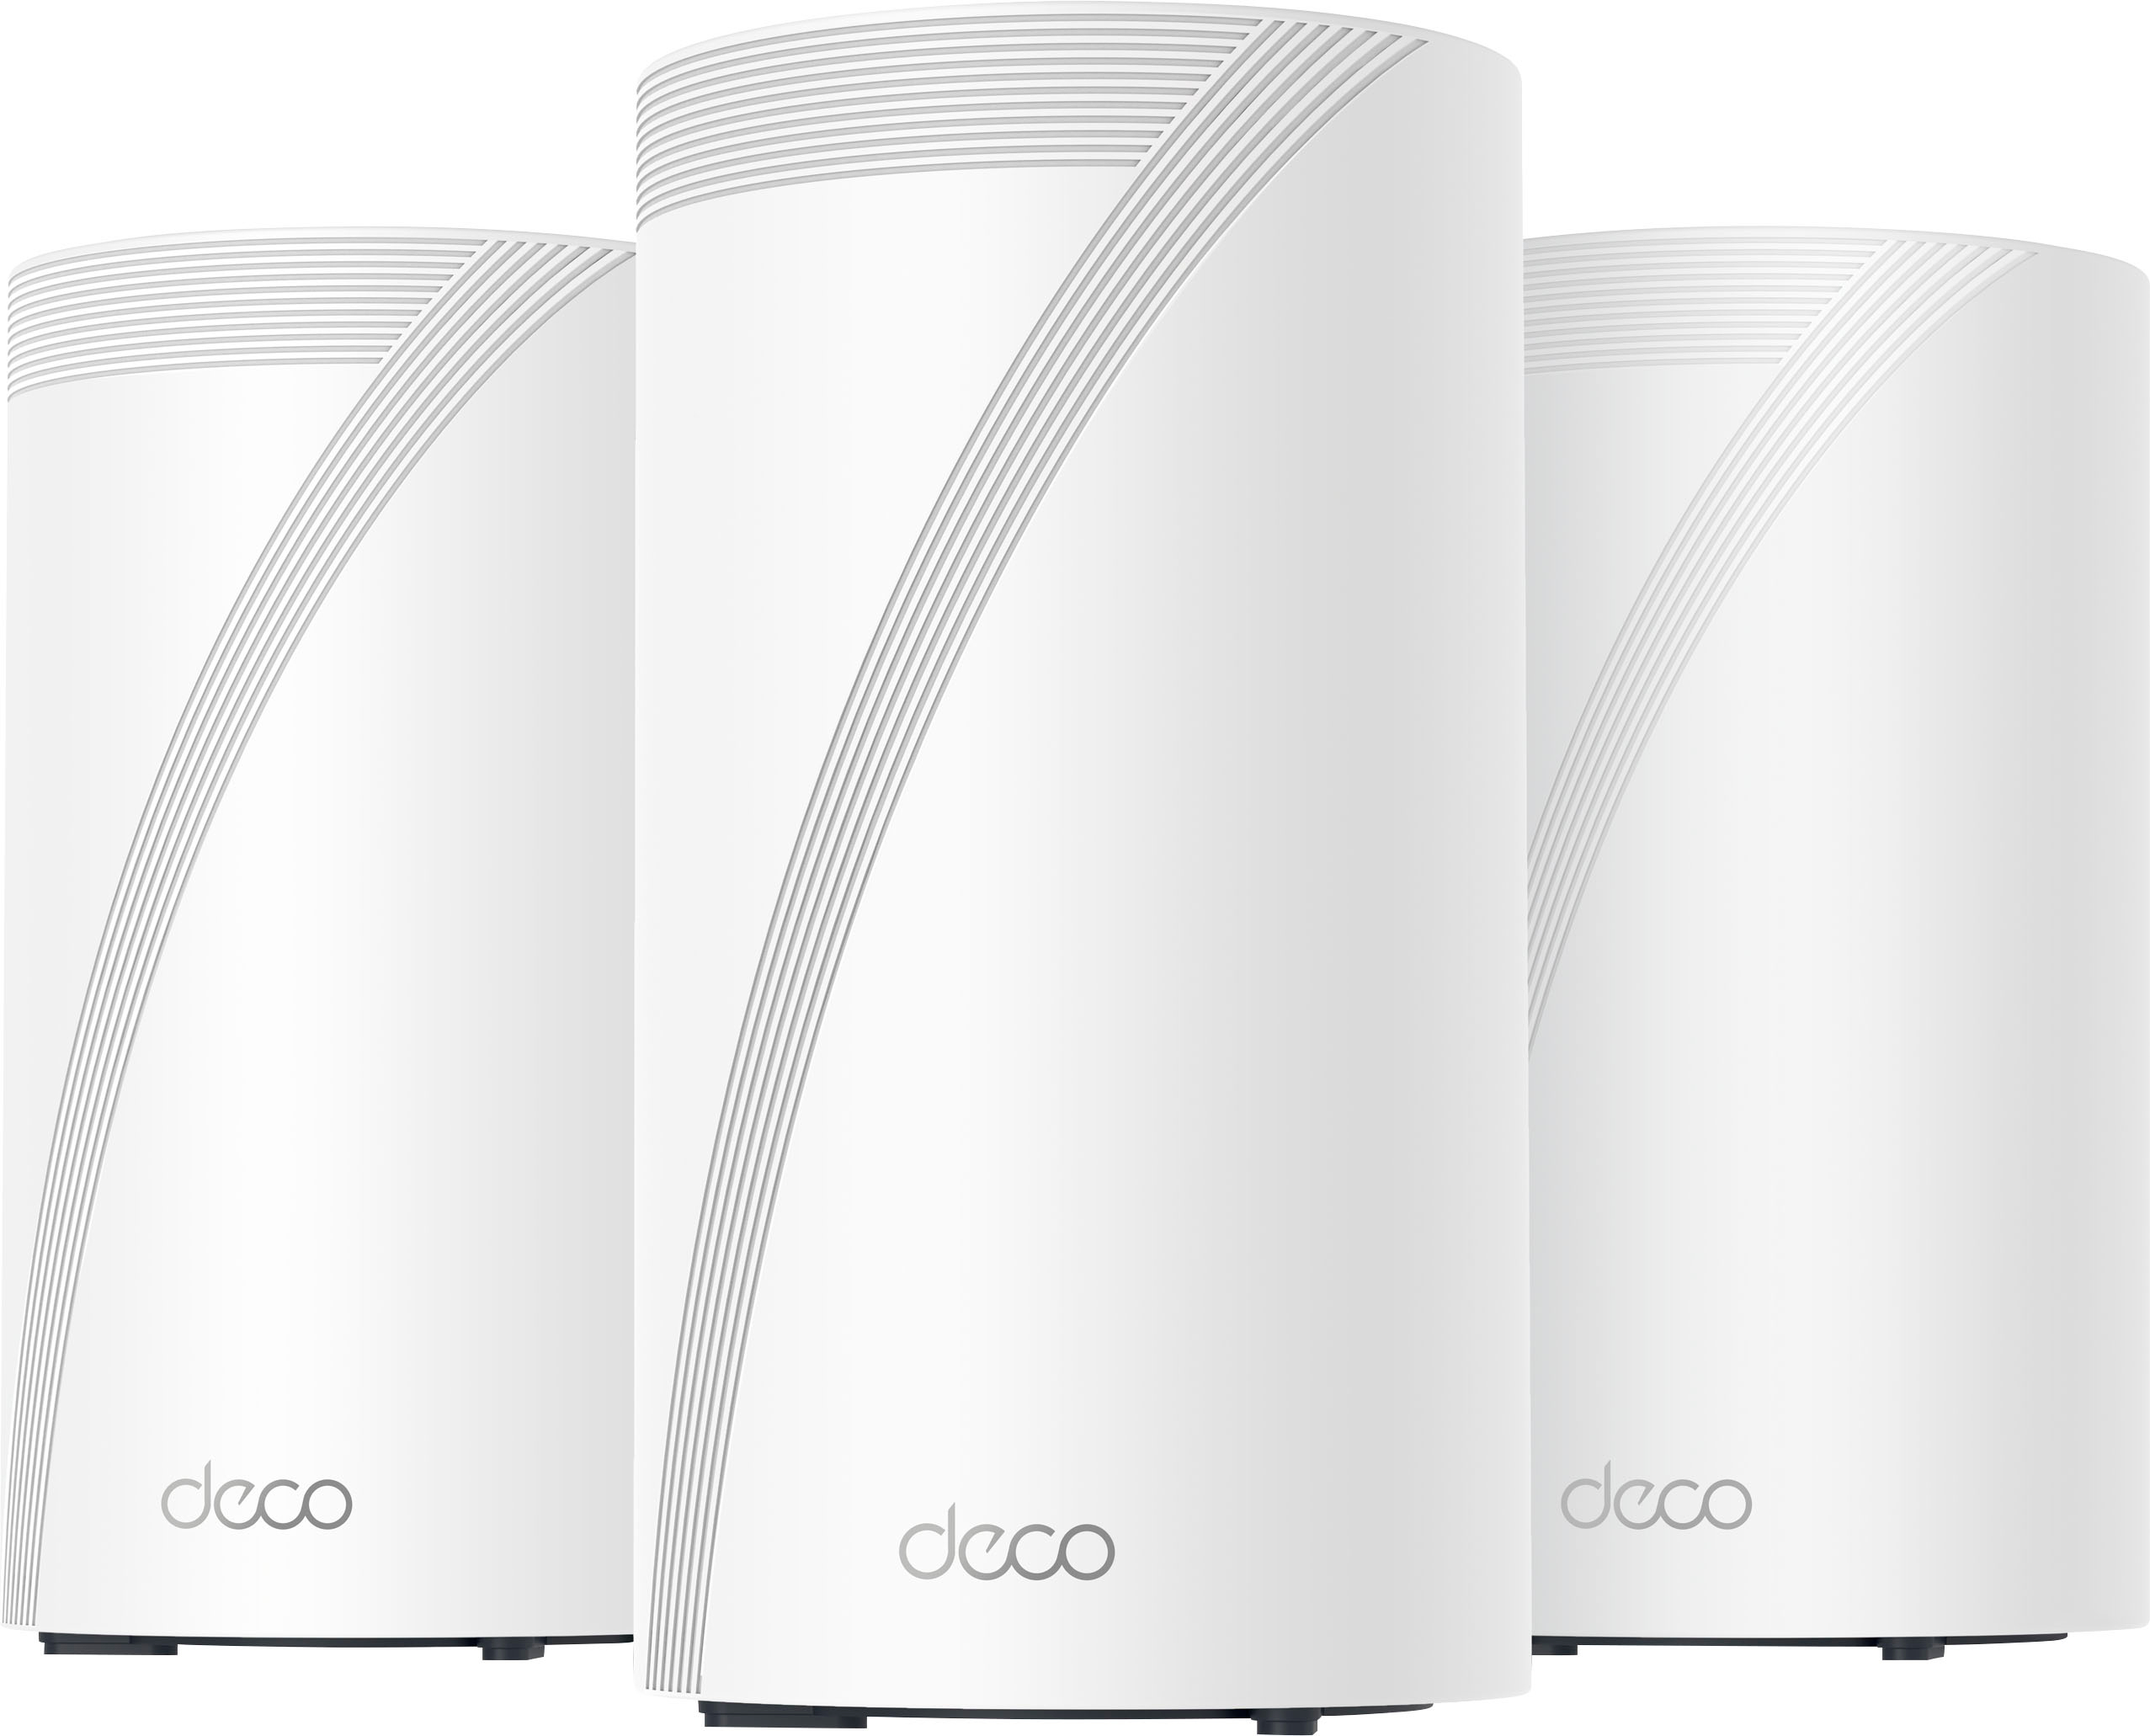 TP-Link Deco BE85 Review: Too Much, Too Soon